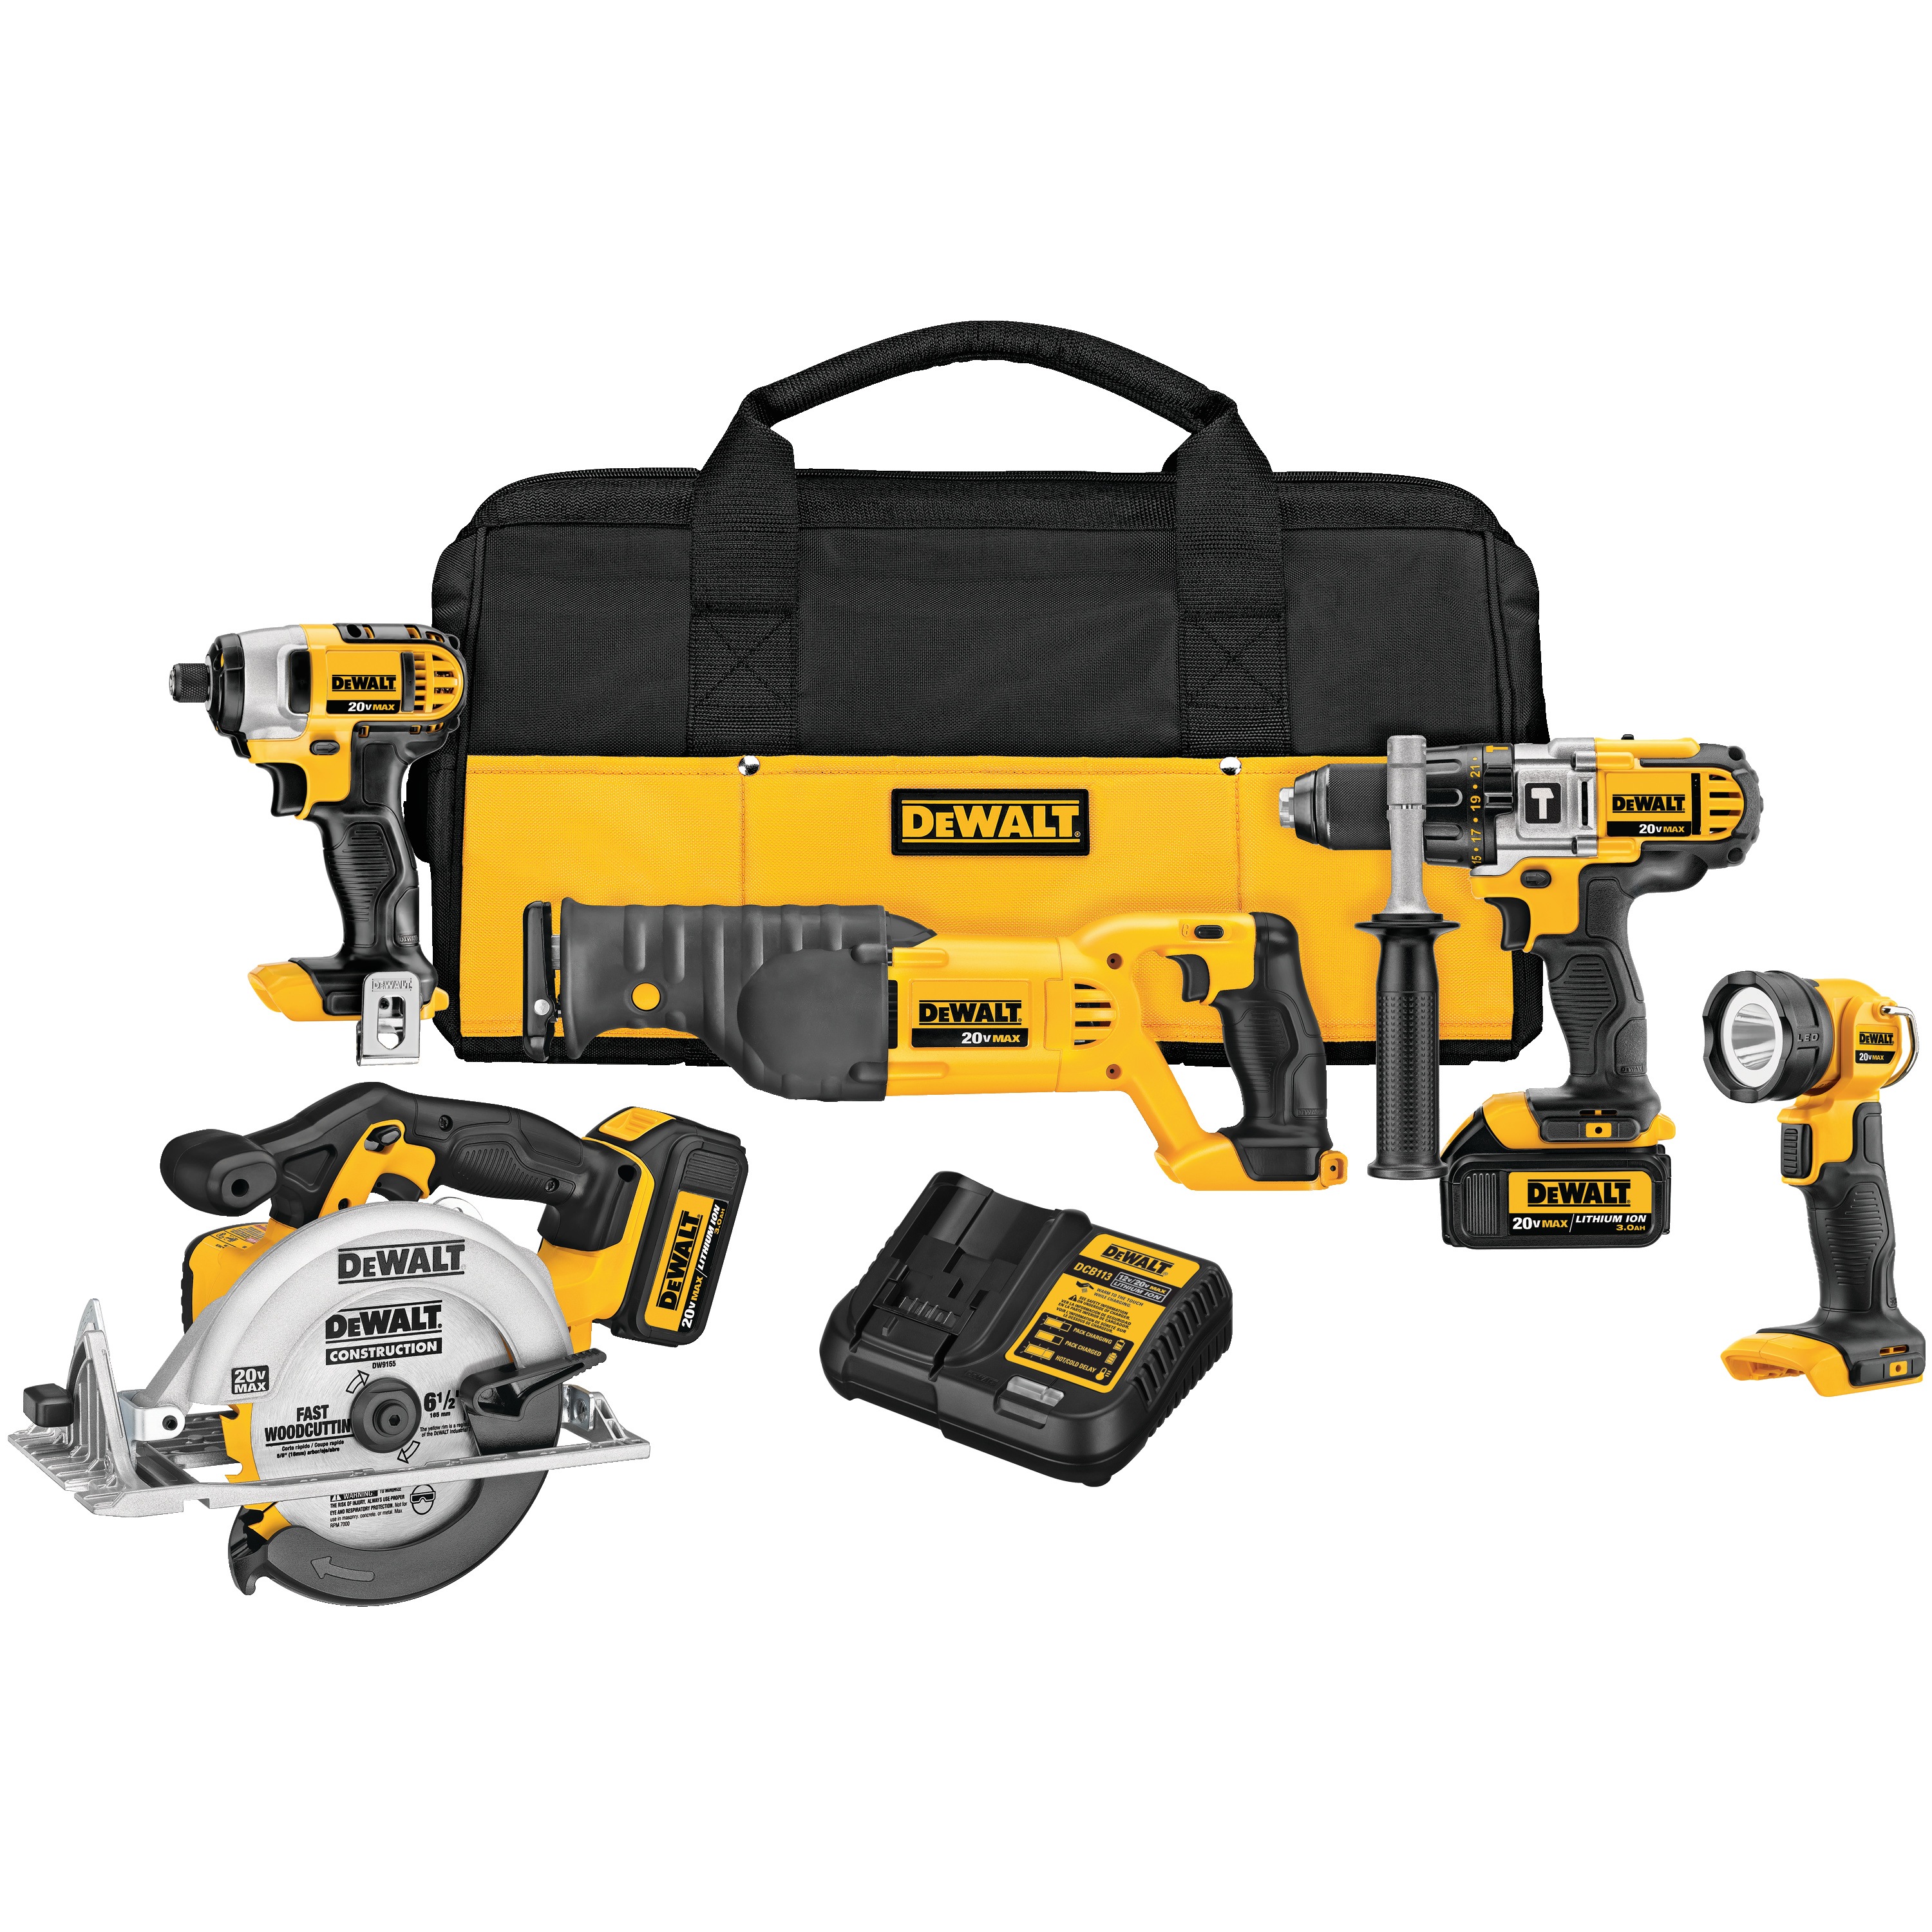 DEWALT DCK720D2 Ah 20V MAX* Compact 7-Tool Combo Kit with DCB205 20V MAX XR 5.0Ah Lithium Ion Battery-Pack - 1